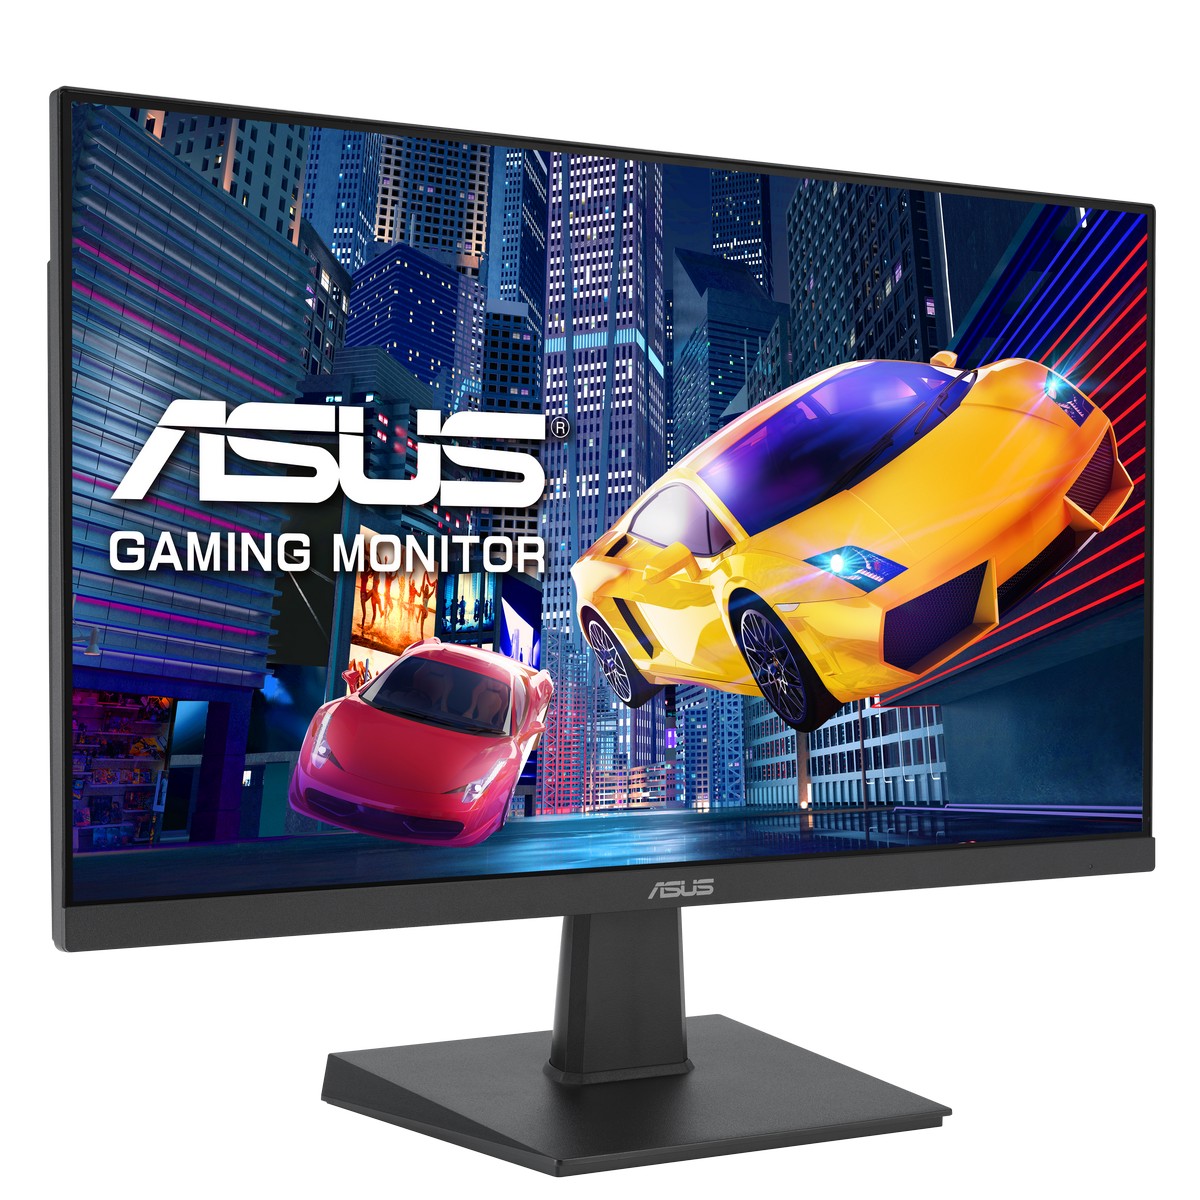 Asus - ASUS 27" VA27EHF IPS 1920x1080 IPS 100Hz 1ms A-Sync Widescreen Monitor